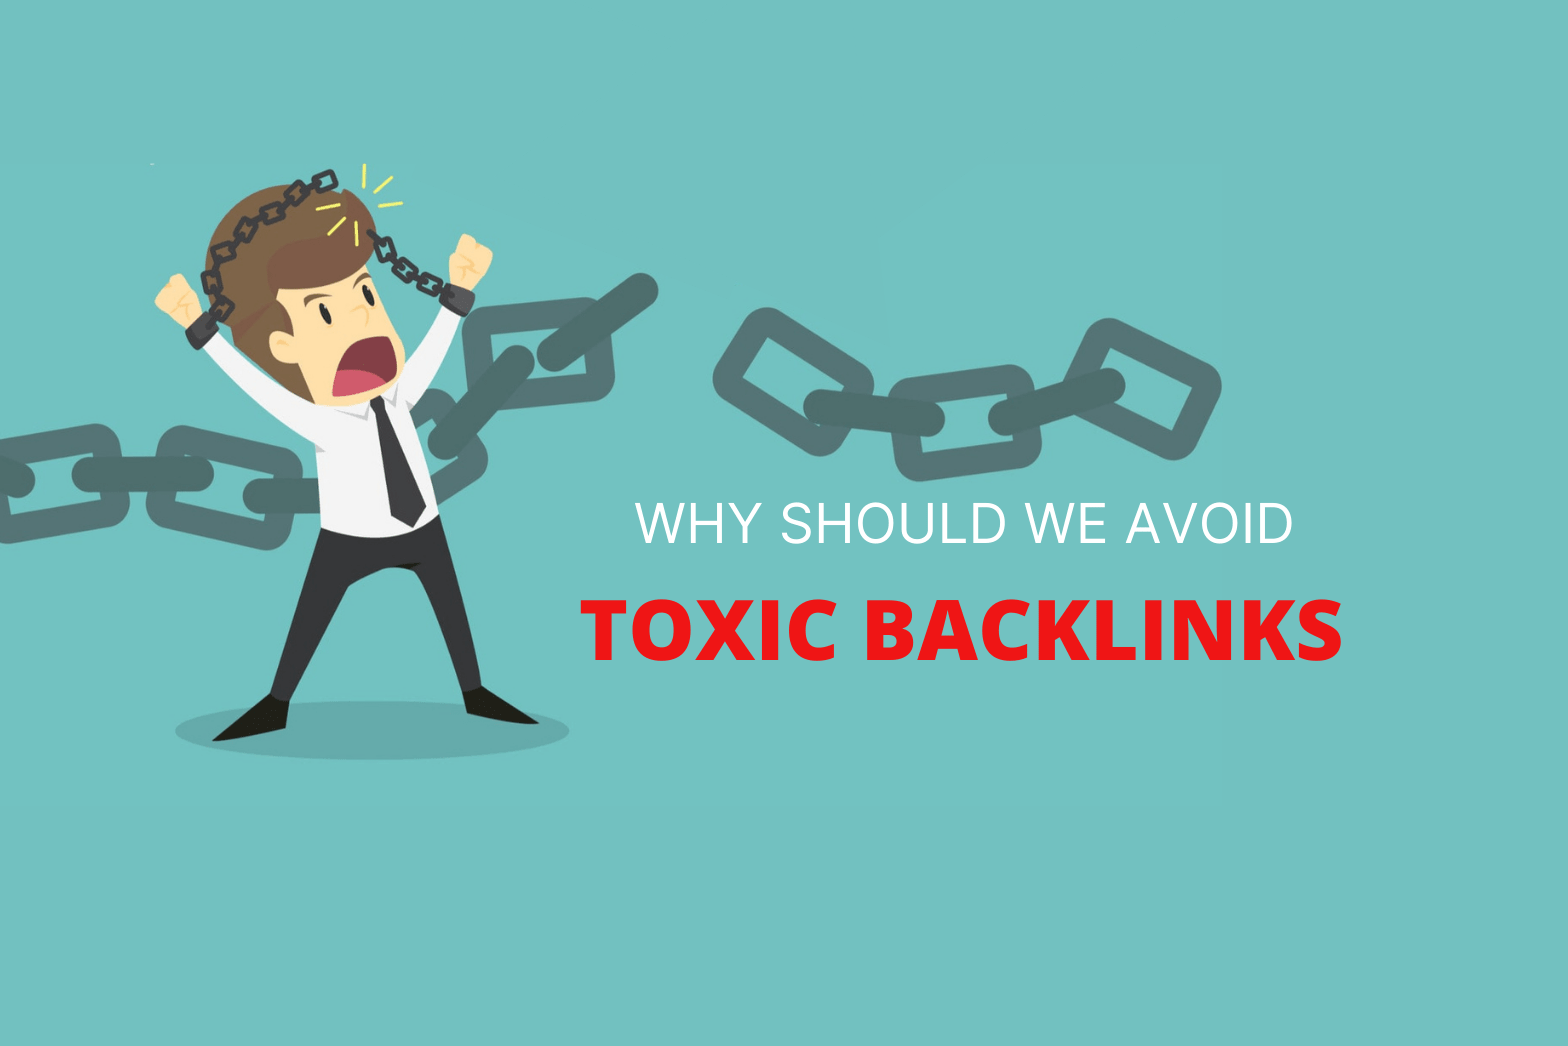 Why Should We Avoid Toxic Backlinks?